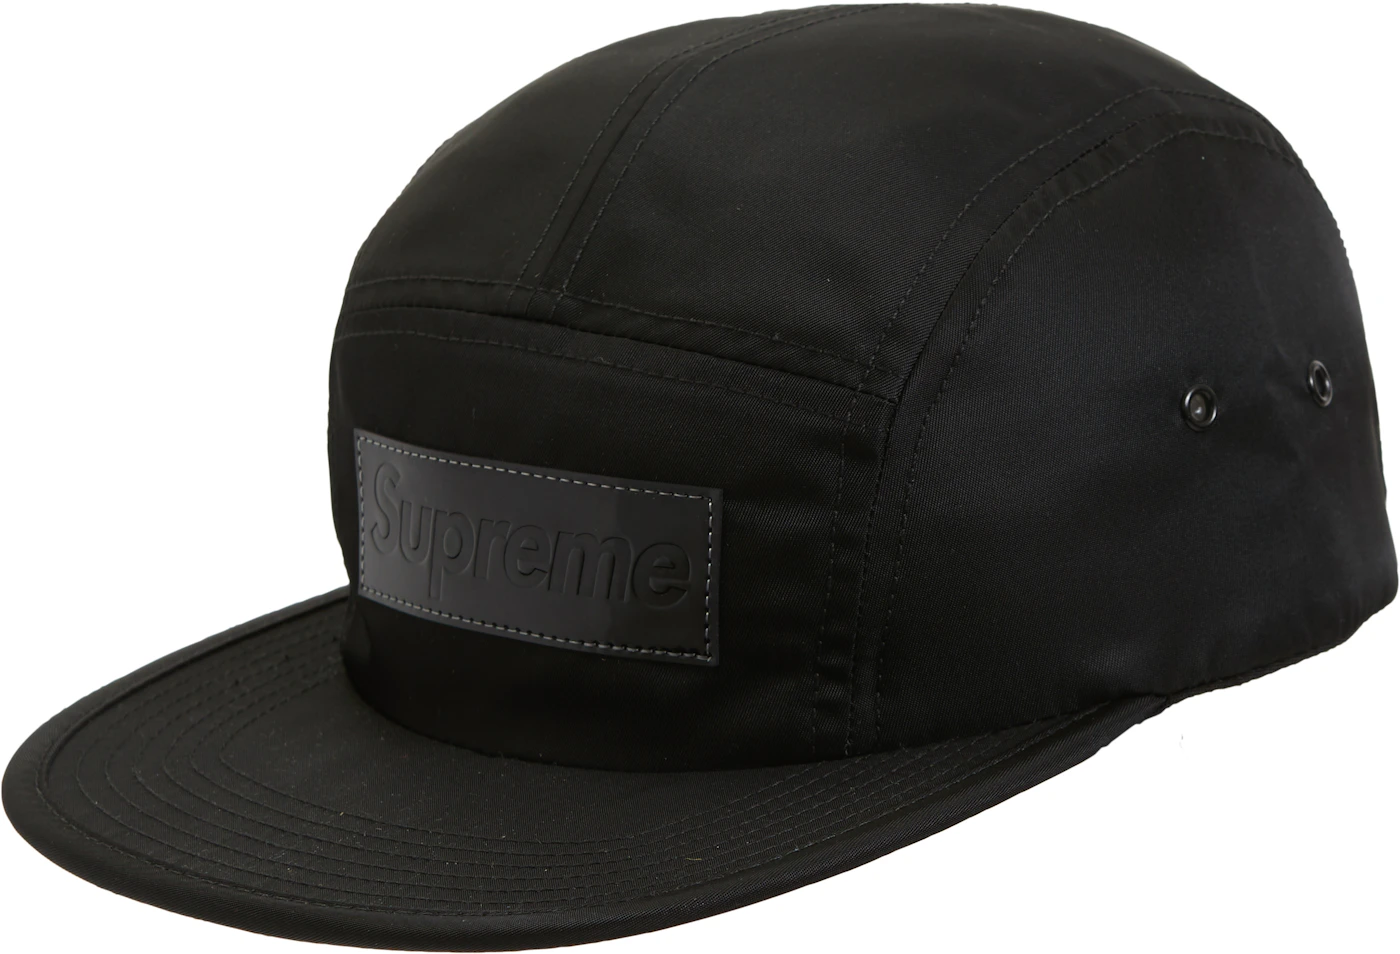 Supreme Nyc Leather Suede Camp Cap Green Black Rare Fw 2012 Box